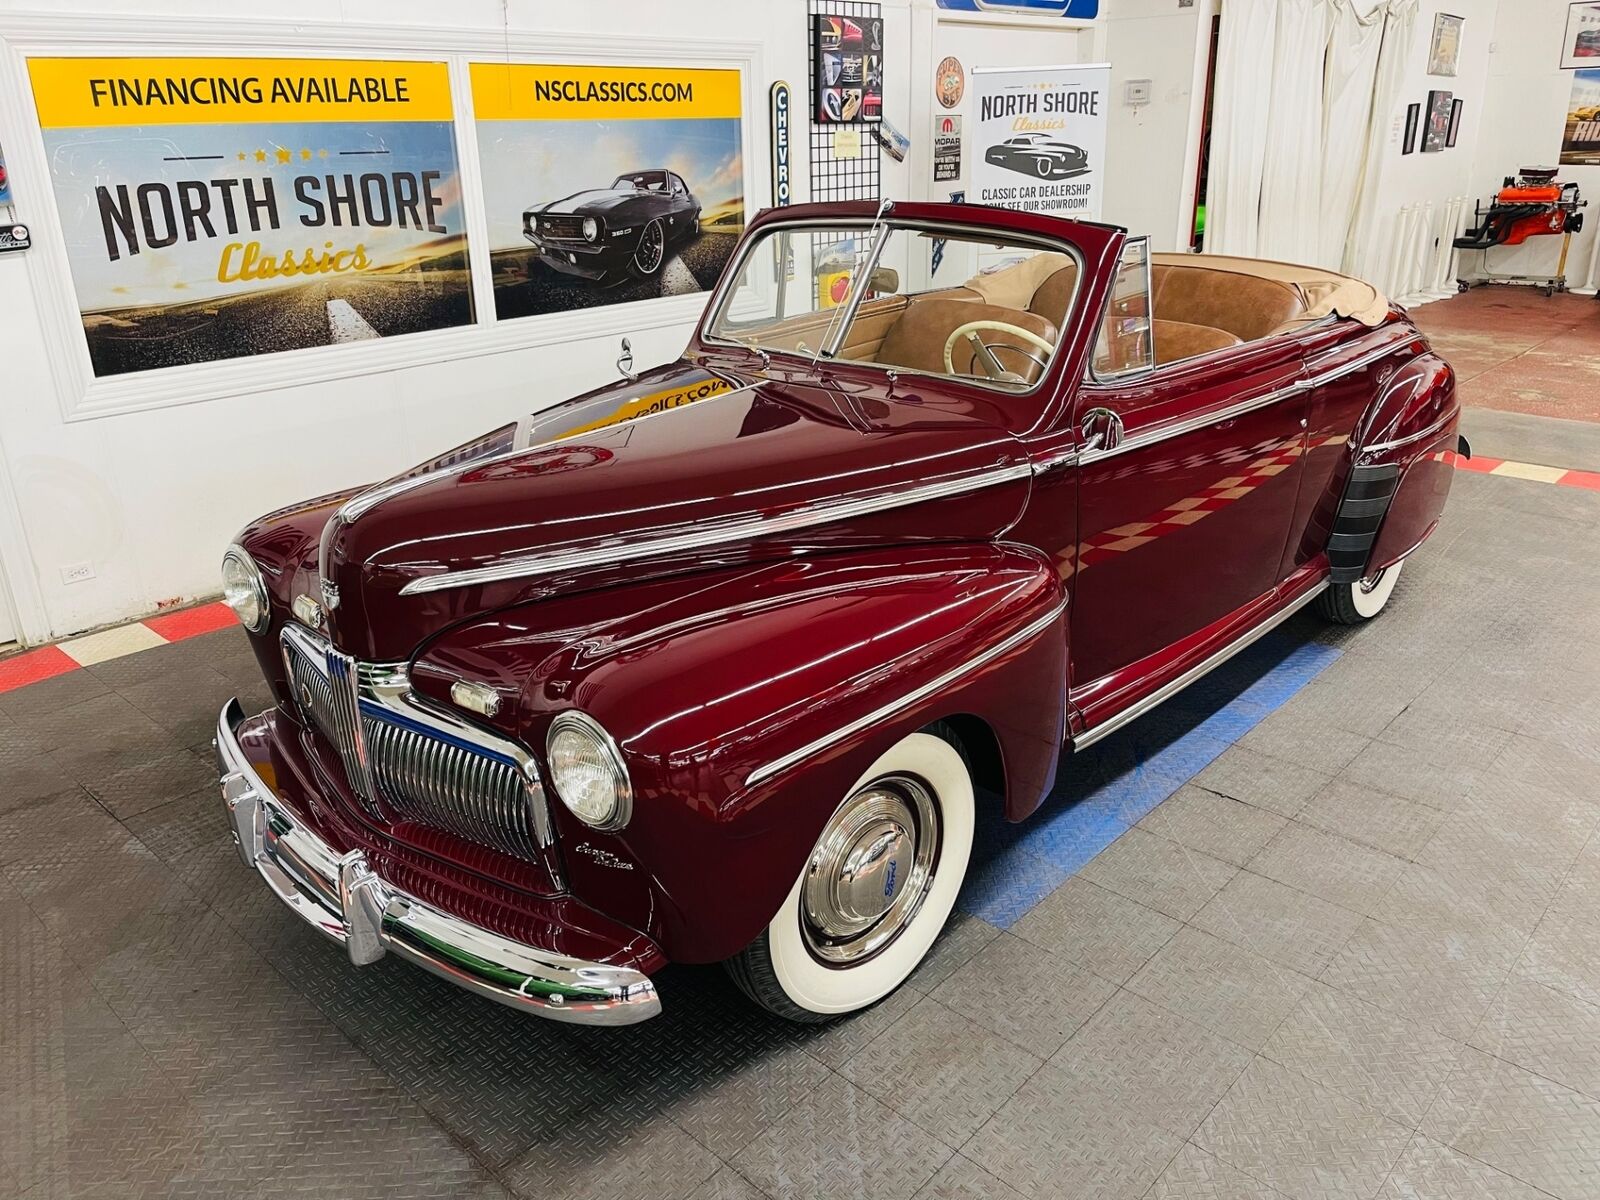 1942 Ford Deluxe, Burgundy/Maroon with 2,223 Miles available now!